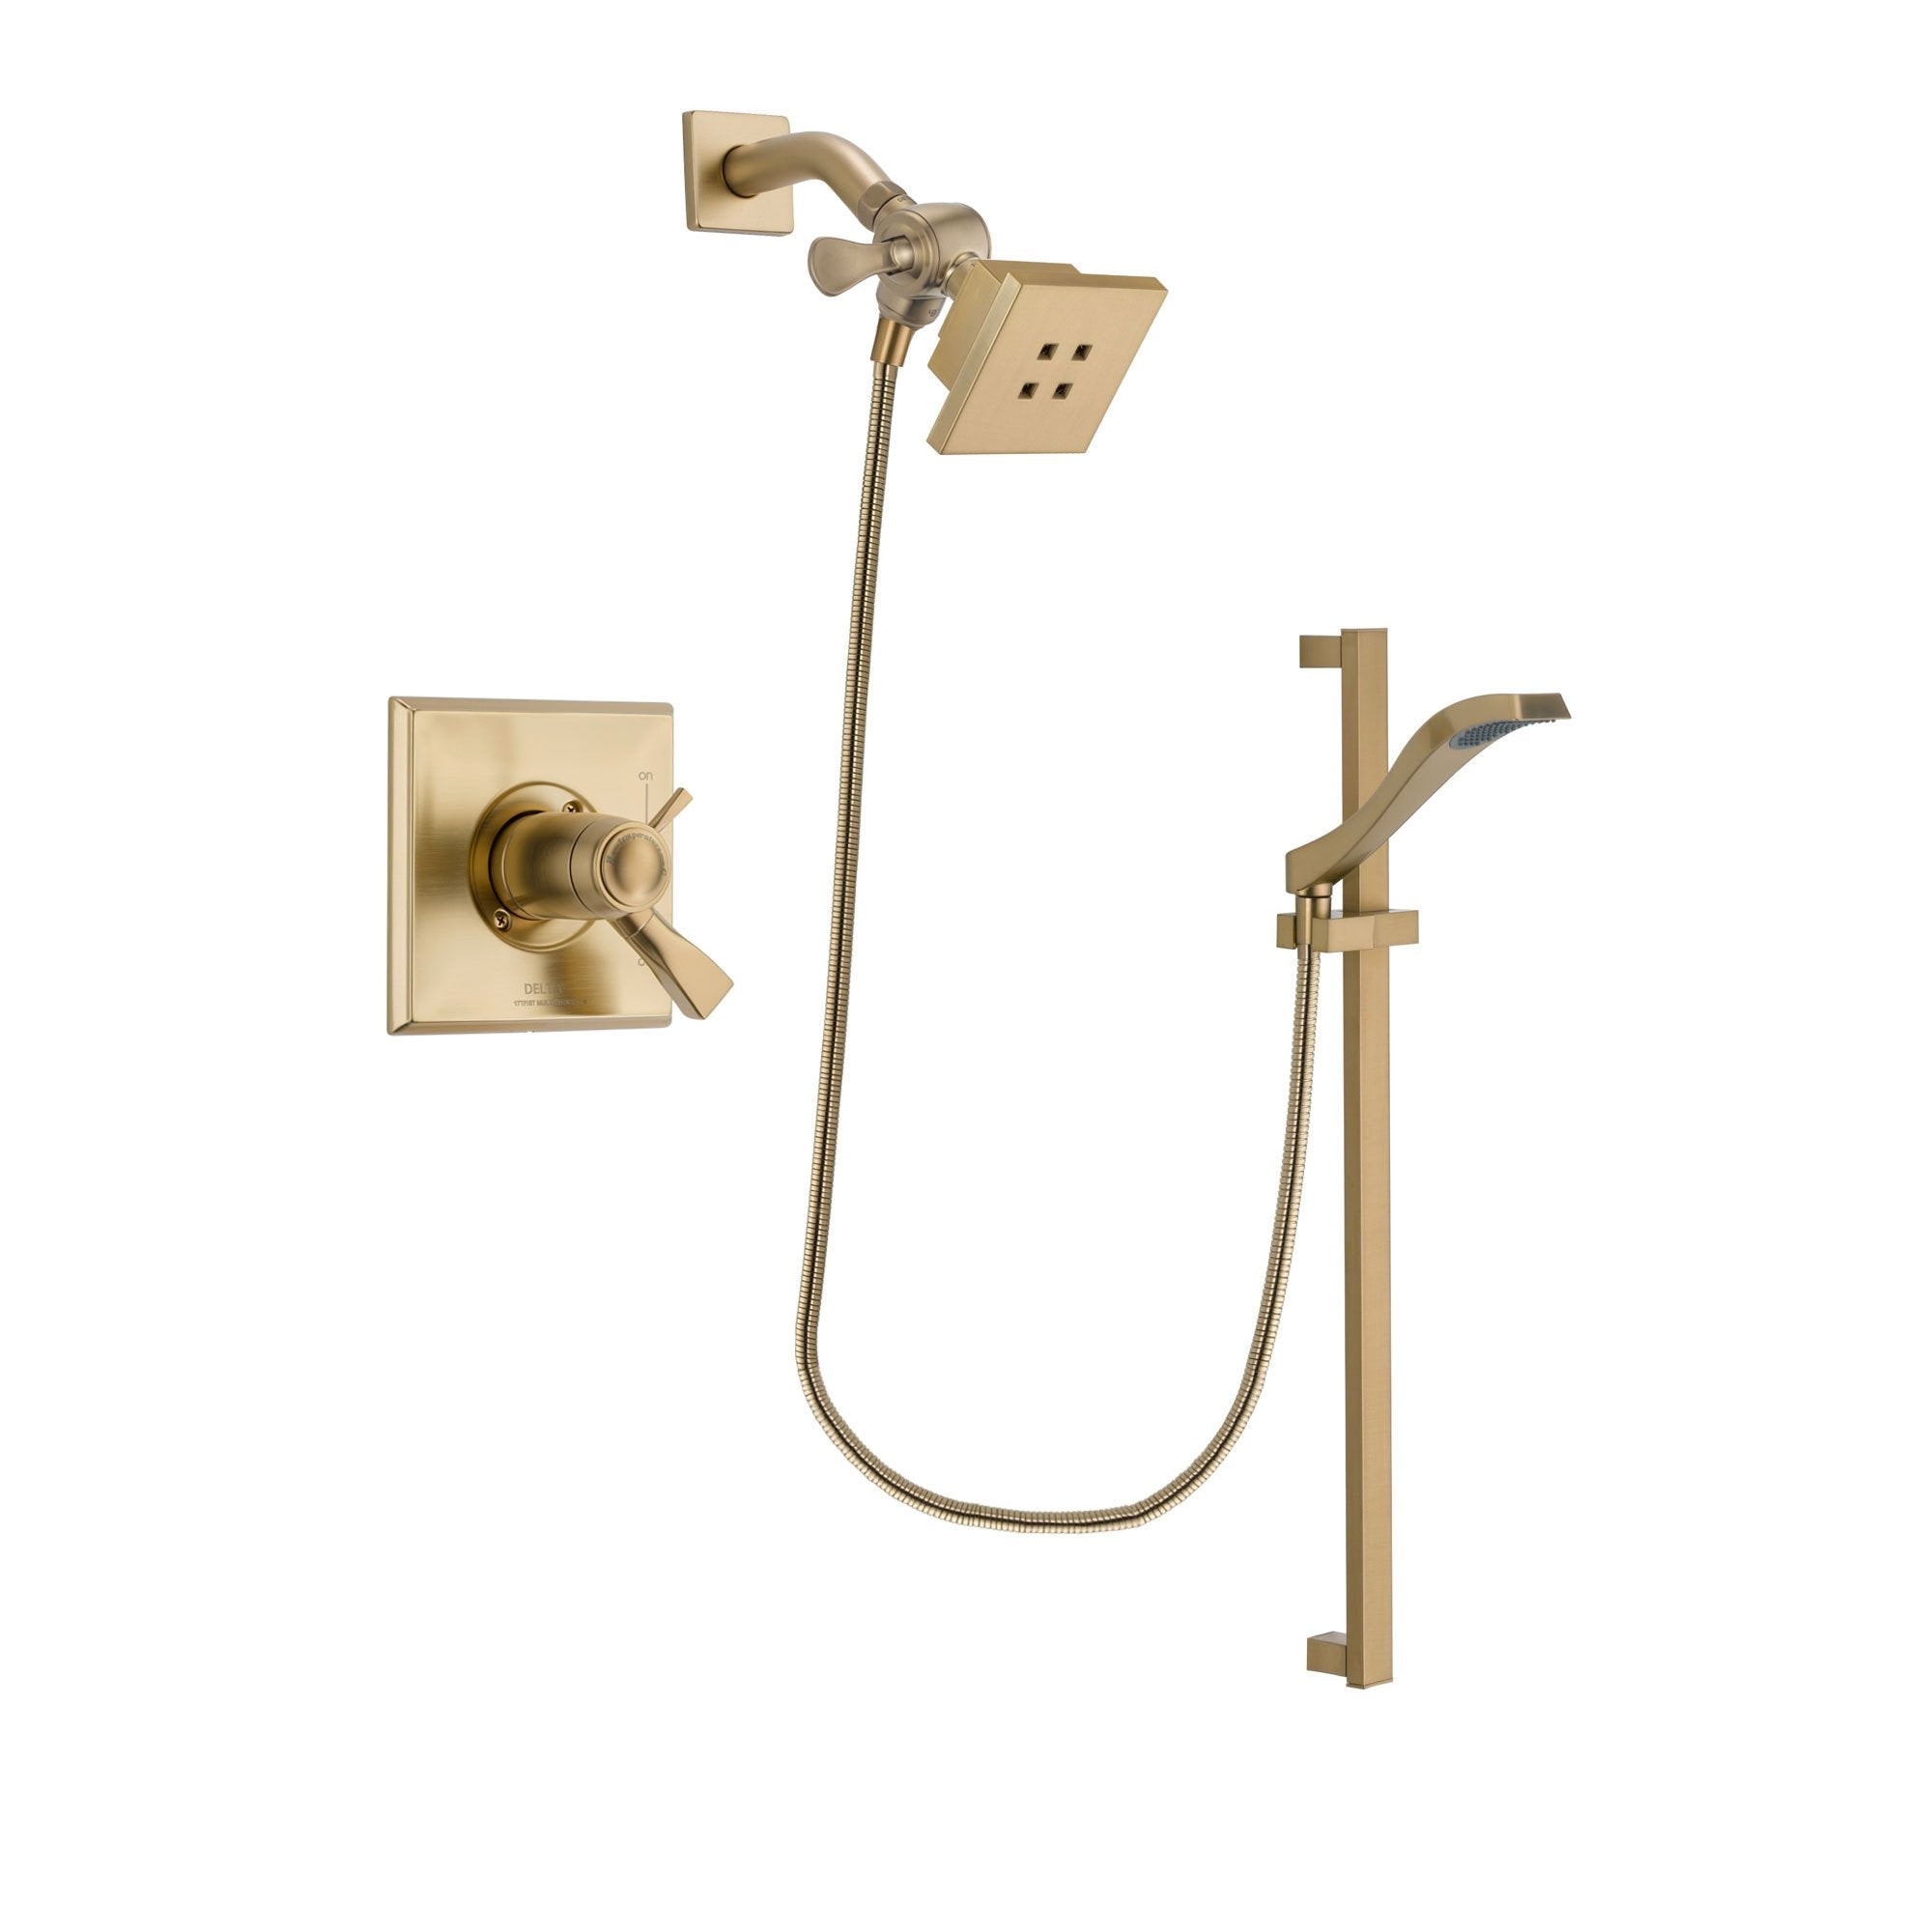 Delta Dryden Champagne Bronze Finish Thermostatic Shower Faucet System Package with Square Showerhead and Modern Handheld Shower Spray with Slide Bar Includes Rough-in Valve DSP3910V